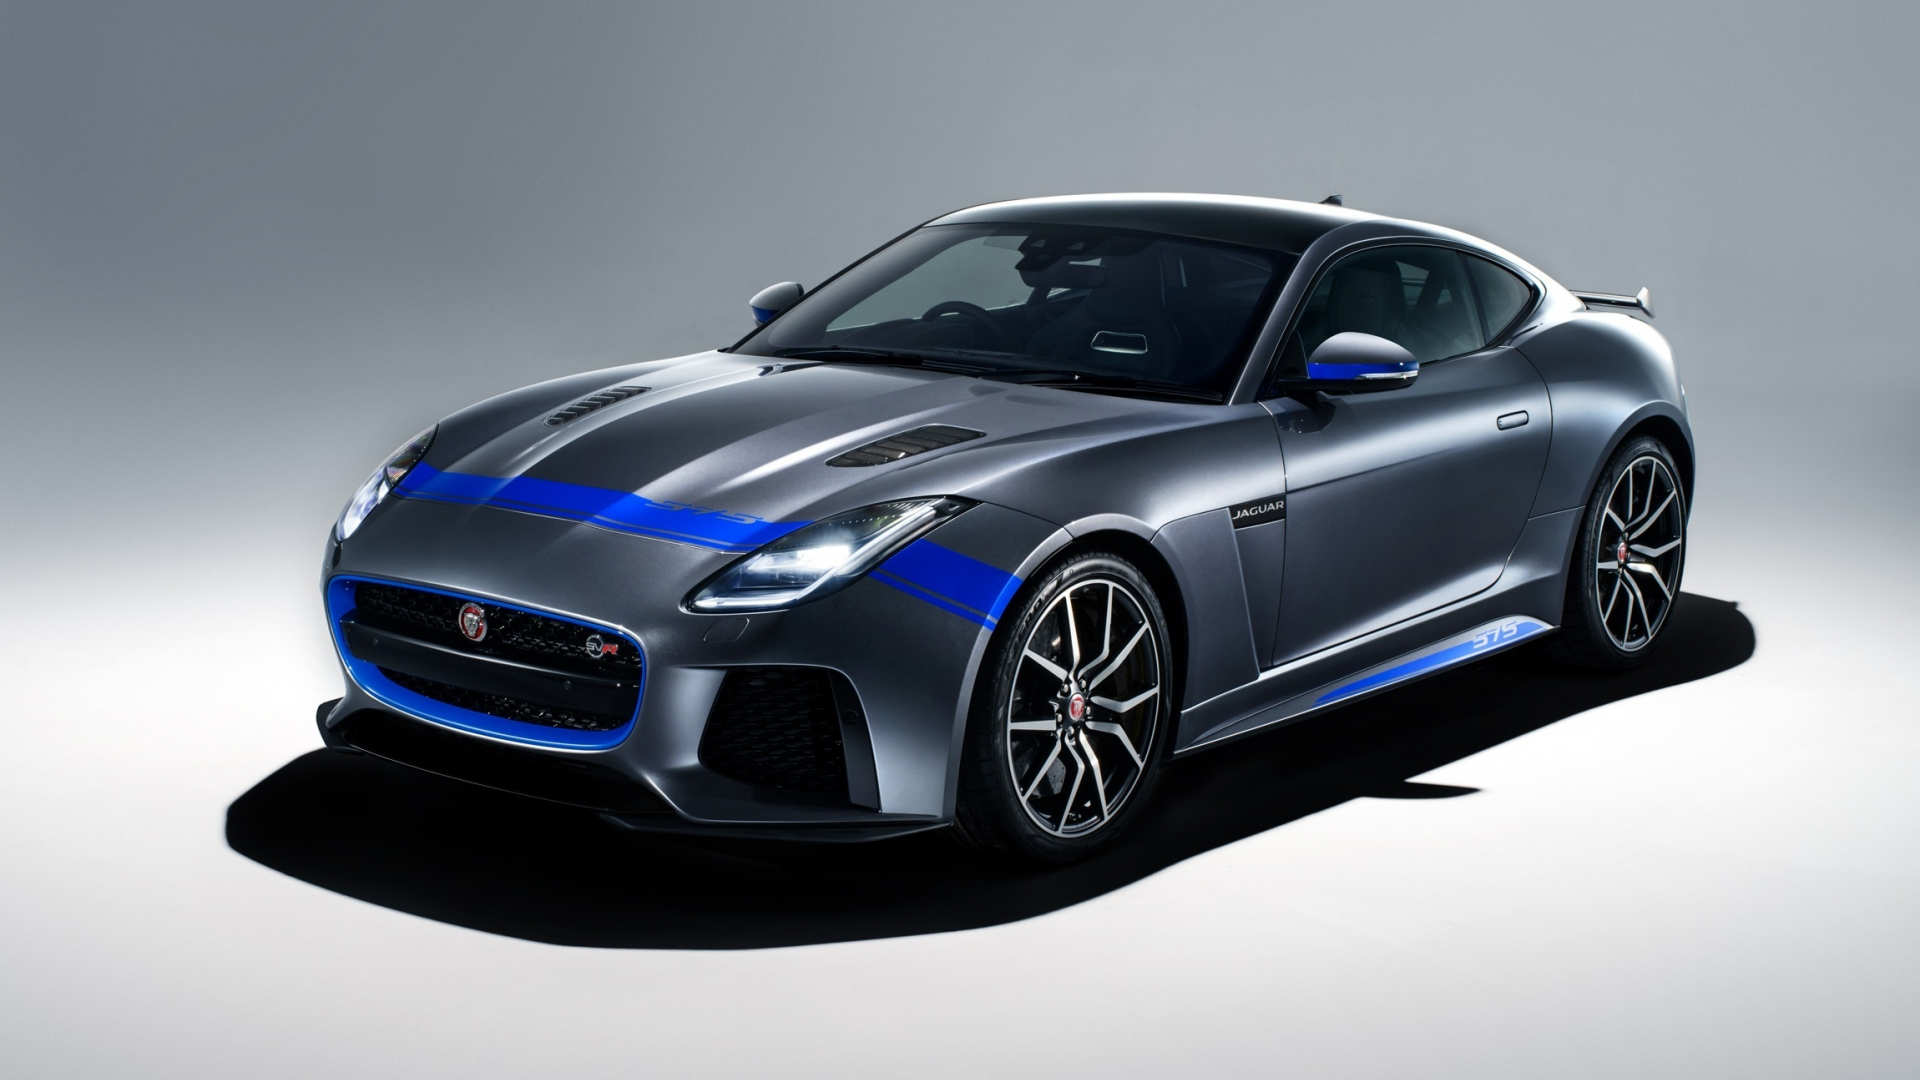 Download wallpaper 1920x1080 jaguar f-type svr coupe, graphic pack, car,  full hd, hdtv, fhd, 1080p wallpaper, 1920x1080 hd background, 4052